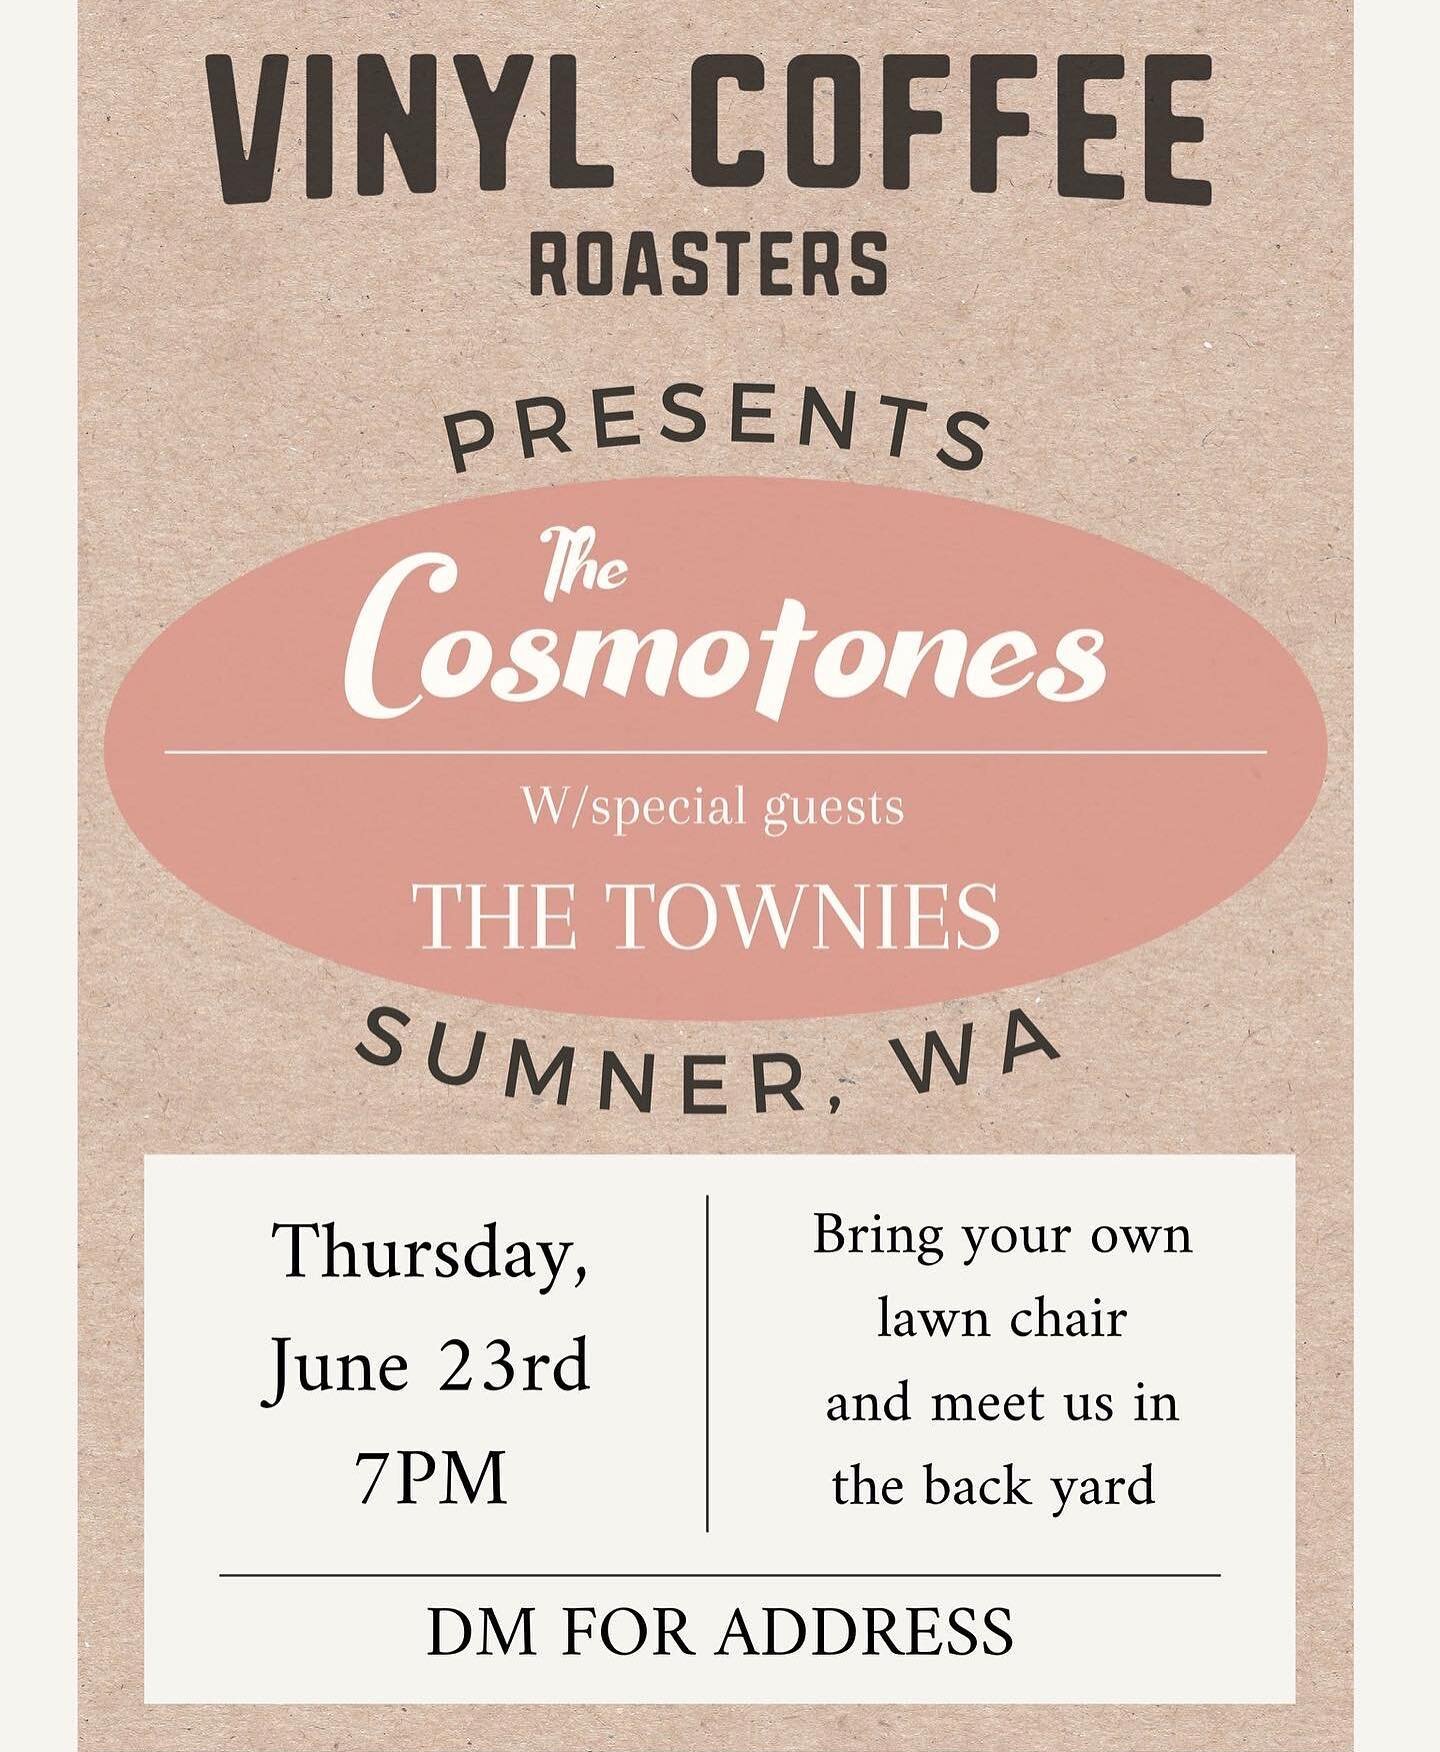 Hey friends &amp; loyal Vinyl heads, we&rsquo;ll be gathering in the Arborvitae Cathedral this Thursday at 7pm to turn up the summer jams with our soulful friends The Cosmotones and dad rocker The Townies! Bring your own lawn chair or blanket and mes